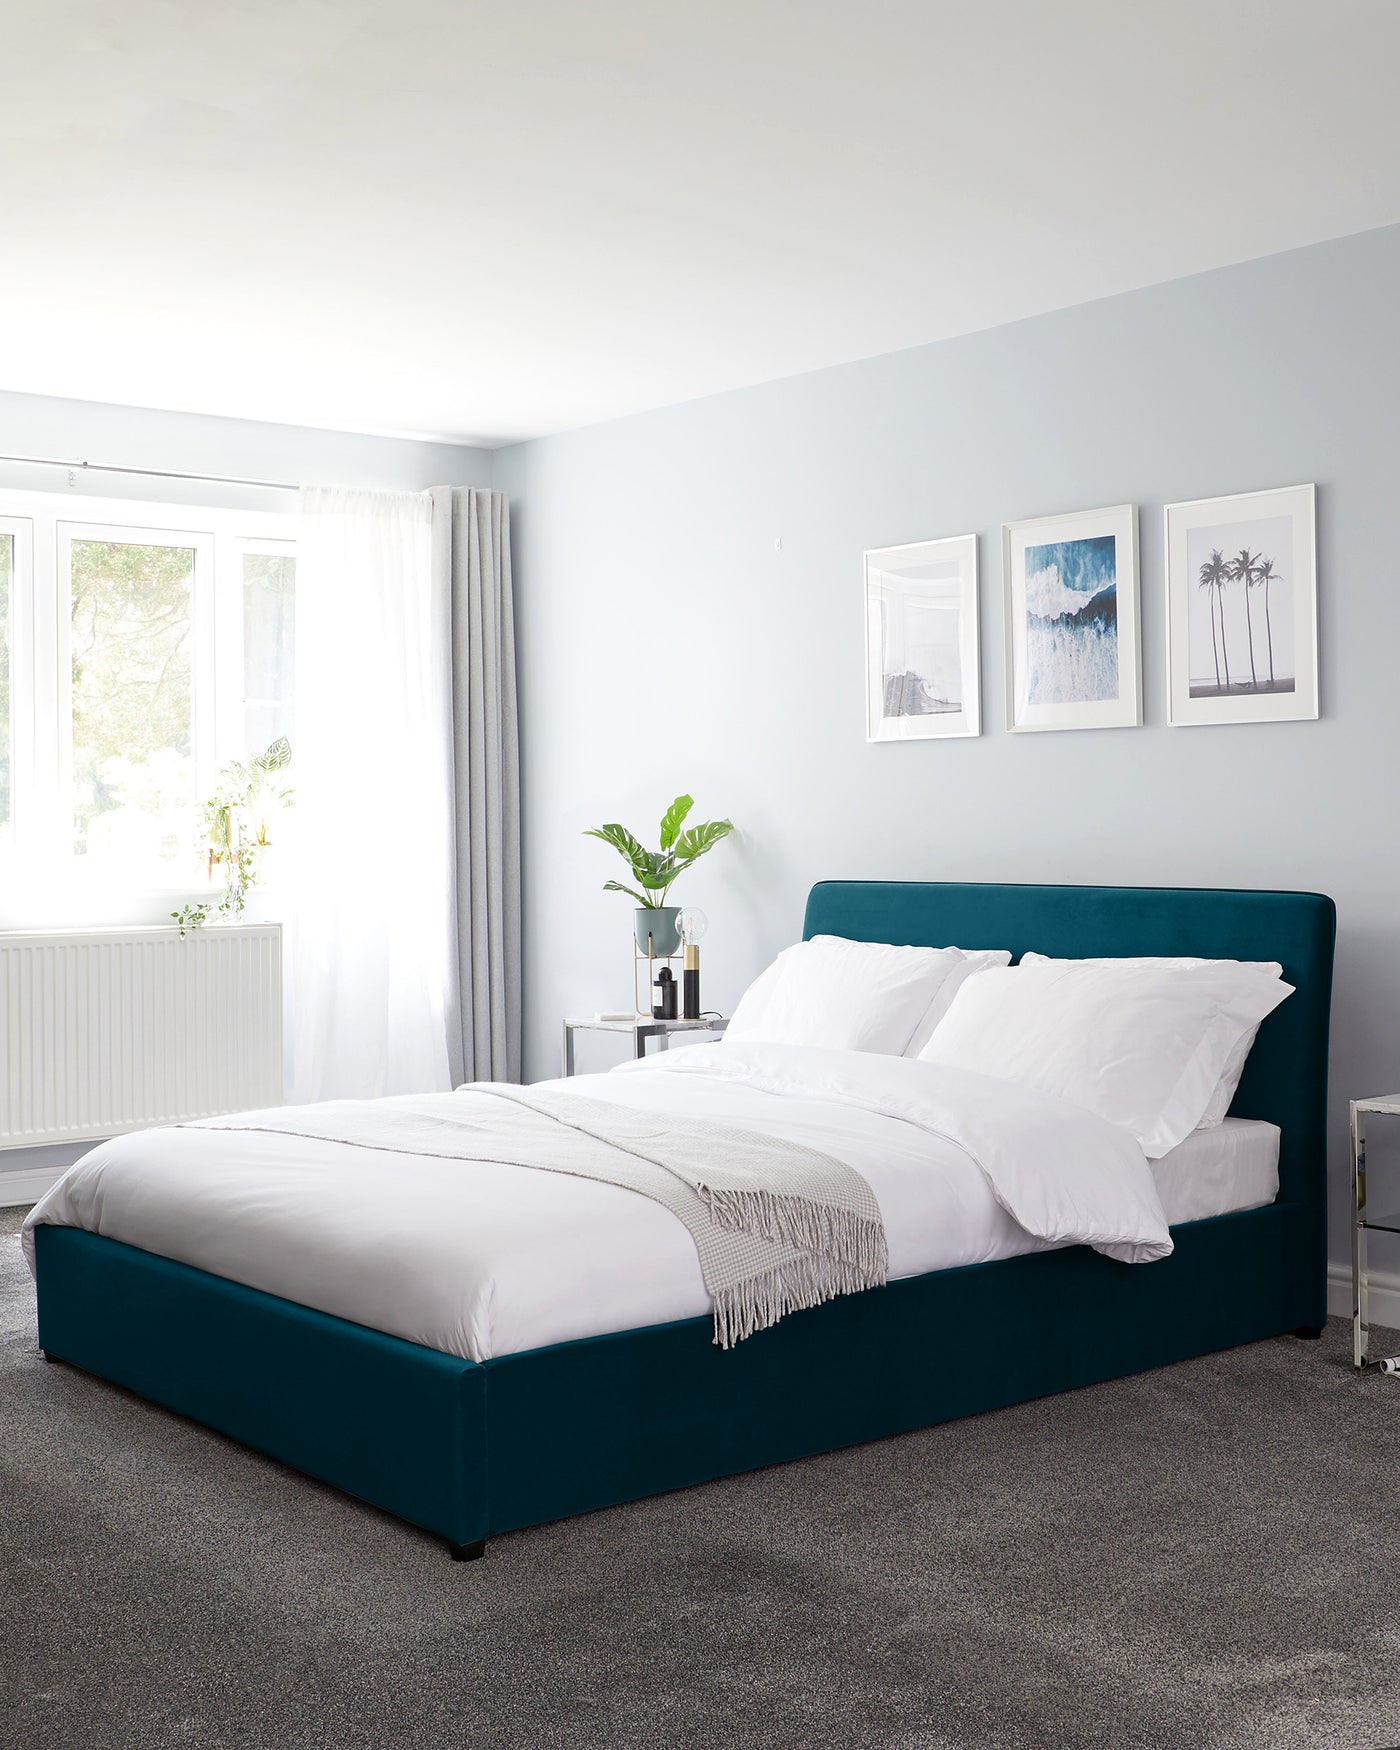 A modern bedroom featuring a plush teal upholstered bed frame with a high, curved headboard and a low-profile footboard. The bed is dressed in crisp white bedding with a contrasting light-grey fringed throw at the foot. The clean lines and bold colour of the bed make it a statement piece in the minimalist-styled room.